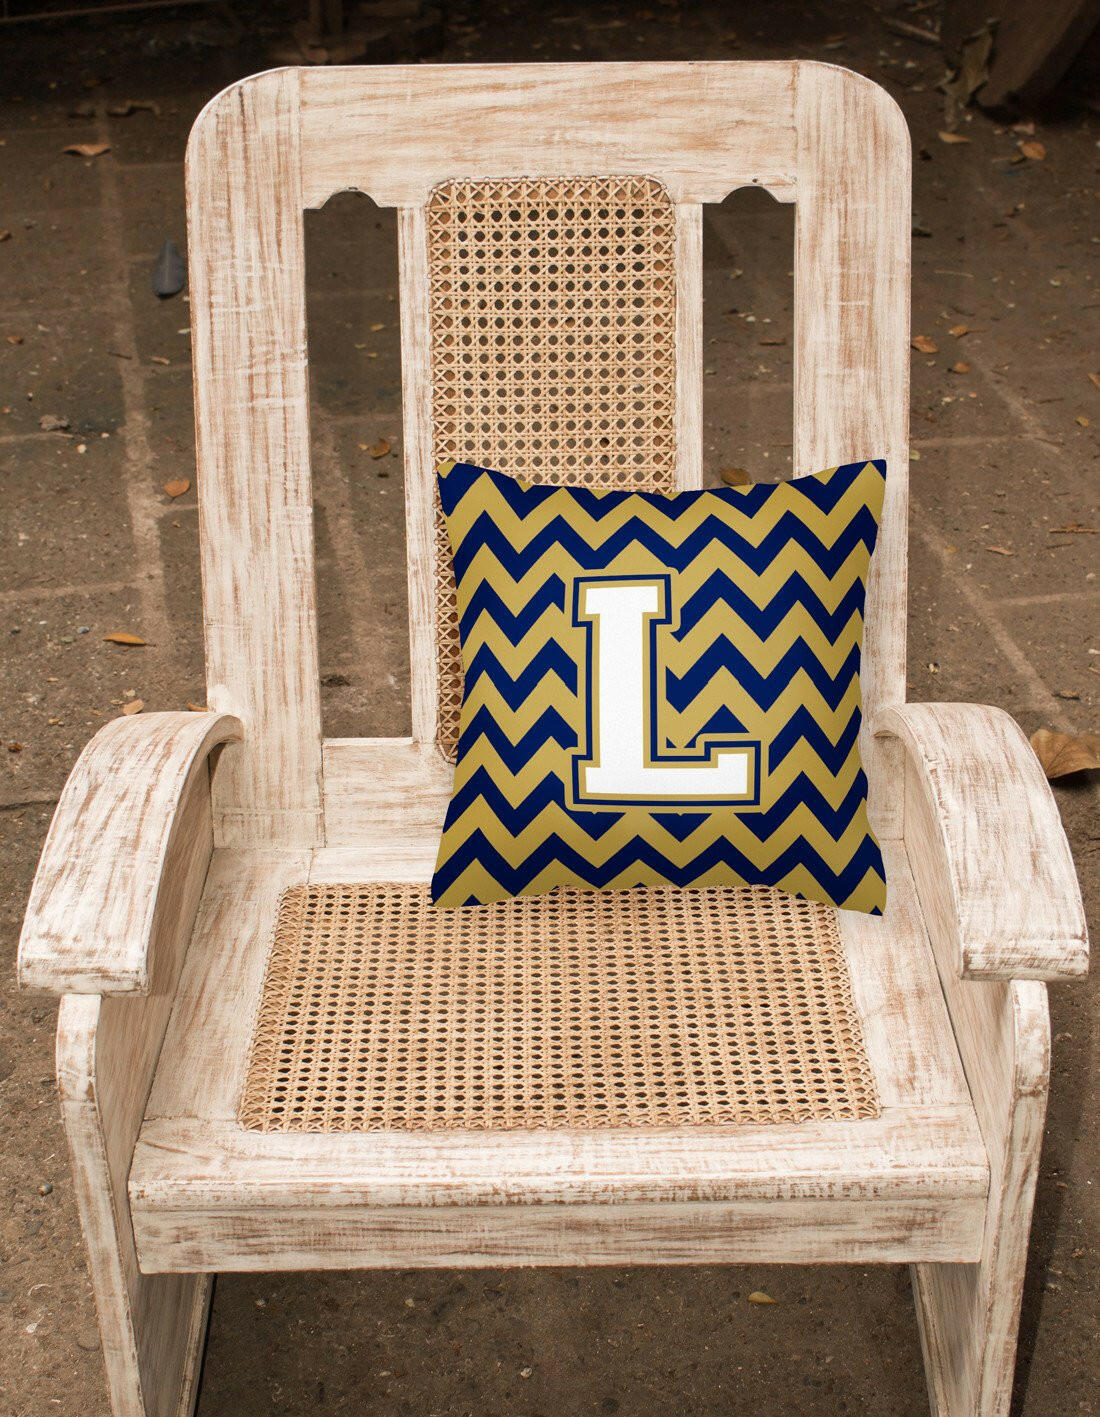 Letter L Chevron Navy Blue and Gold Fabric Decorative Pillow CJ1057-LPW1414 by Caroline's Treasures